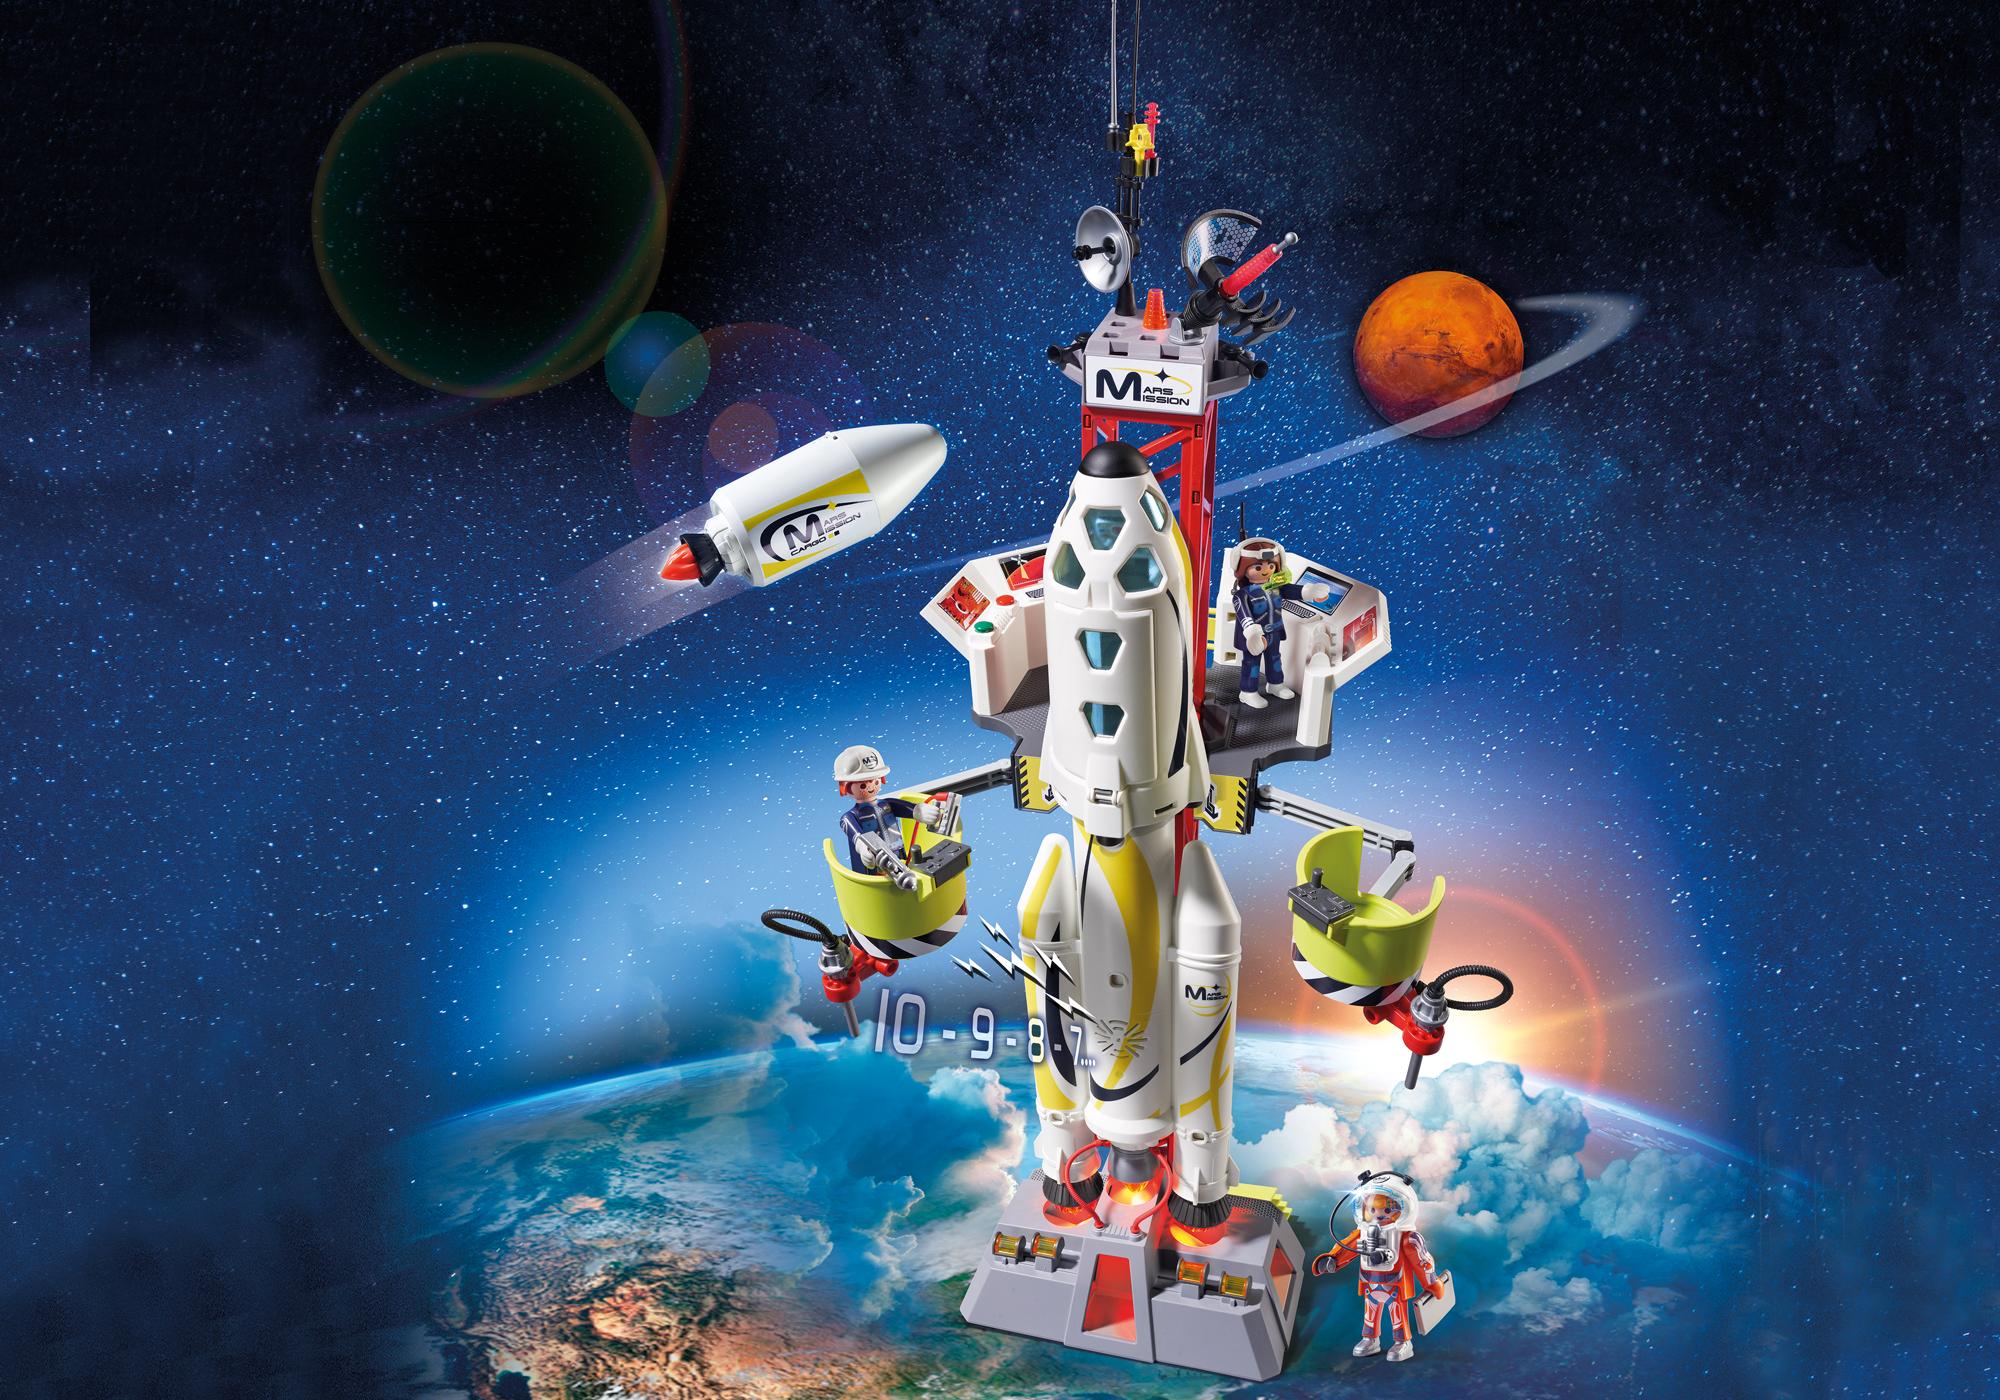 playmobil space shuttle